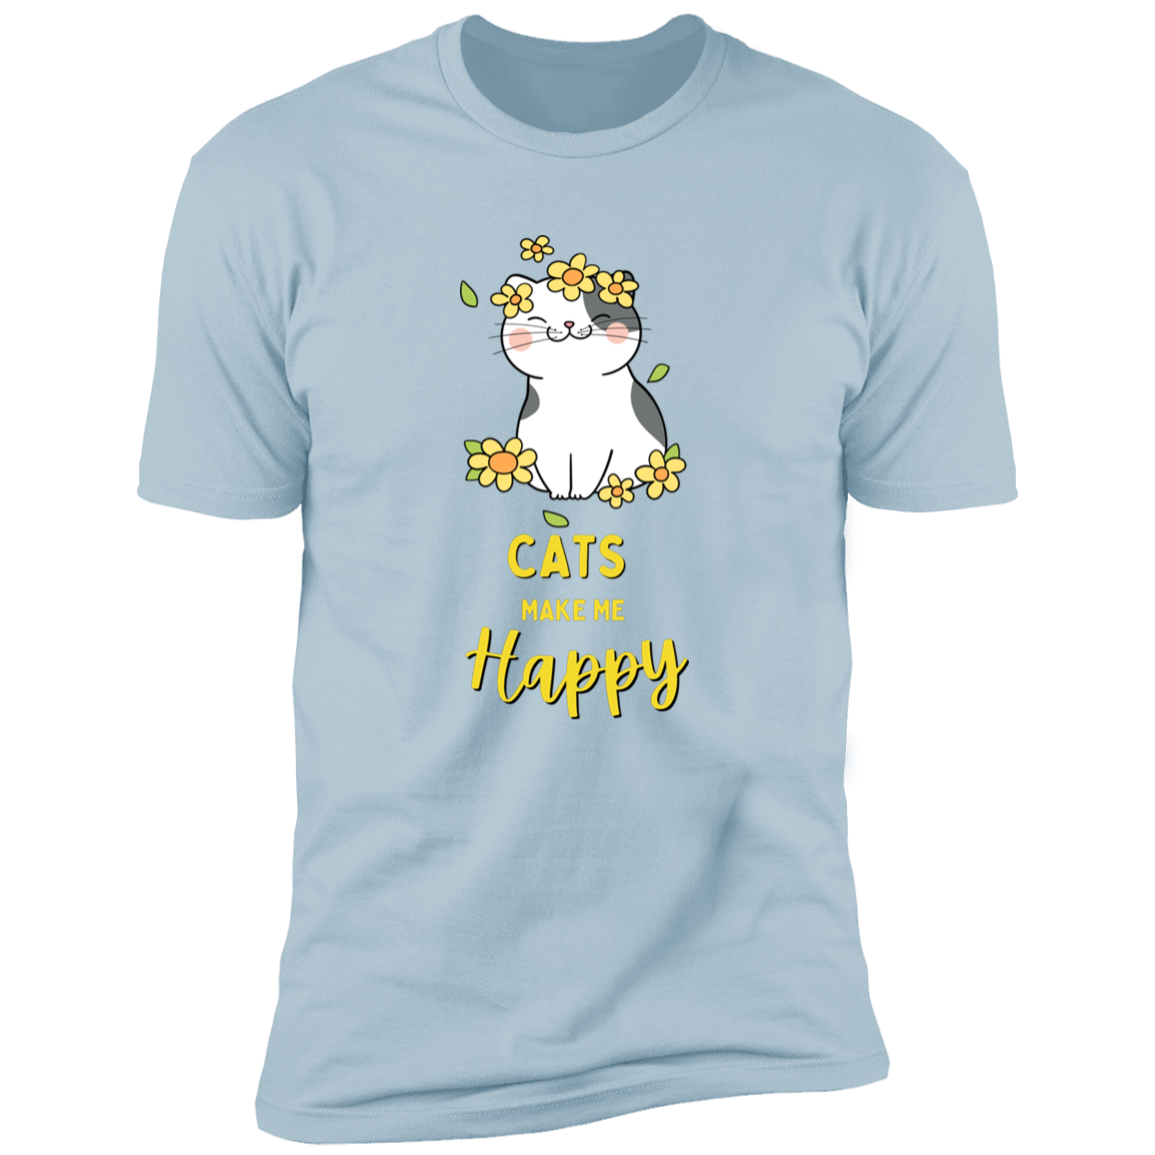 Cats Make Me Happy T-shirt, Cat Shirt for humans, in light blue